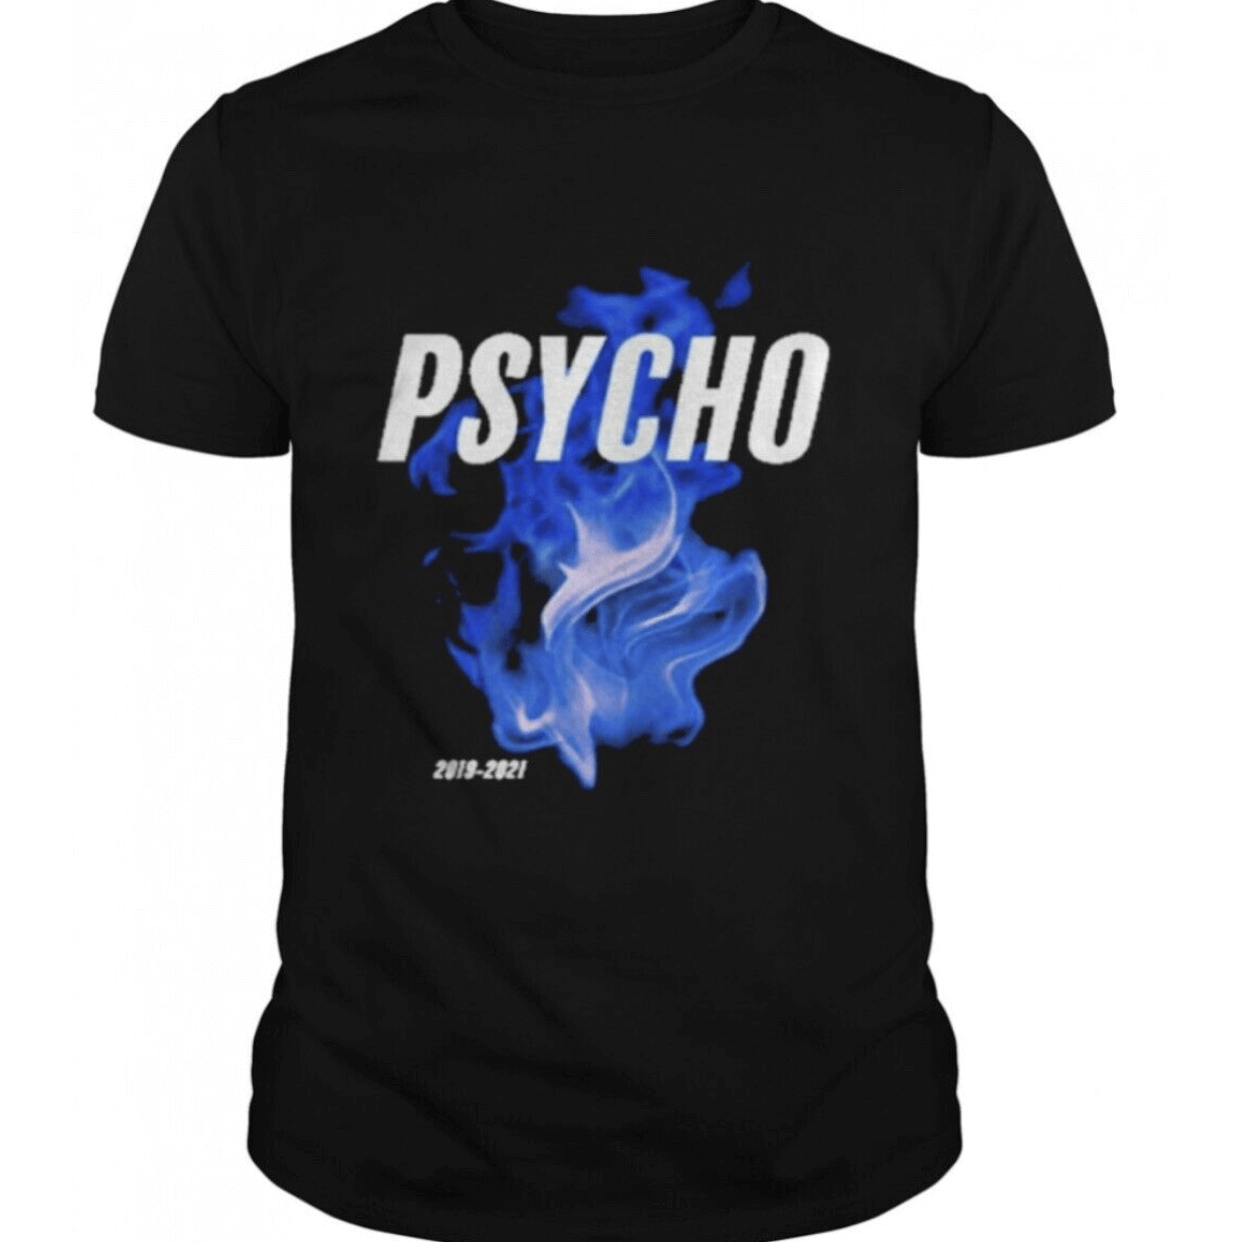 Dave Psychodrama Tee from Dave